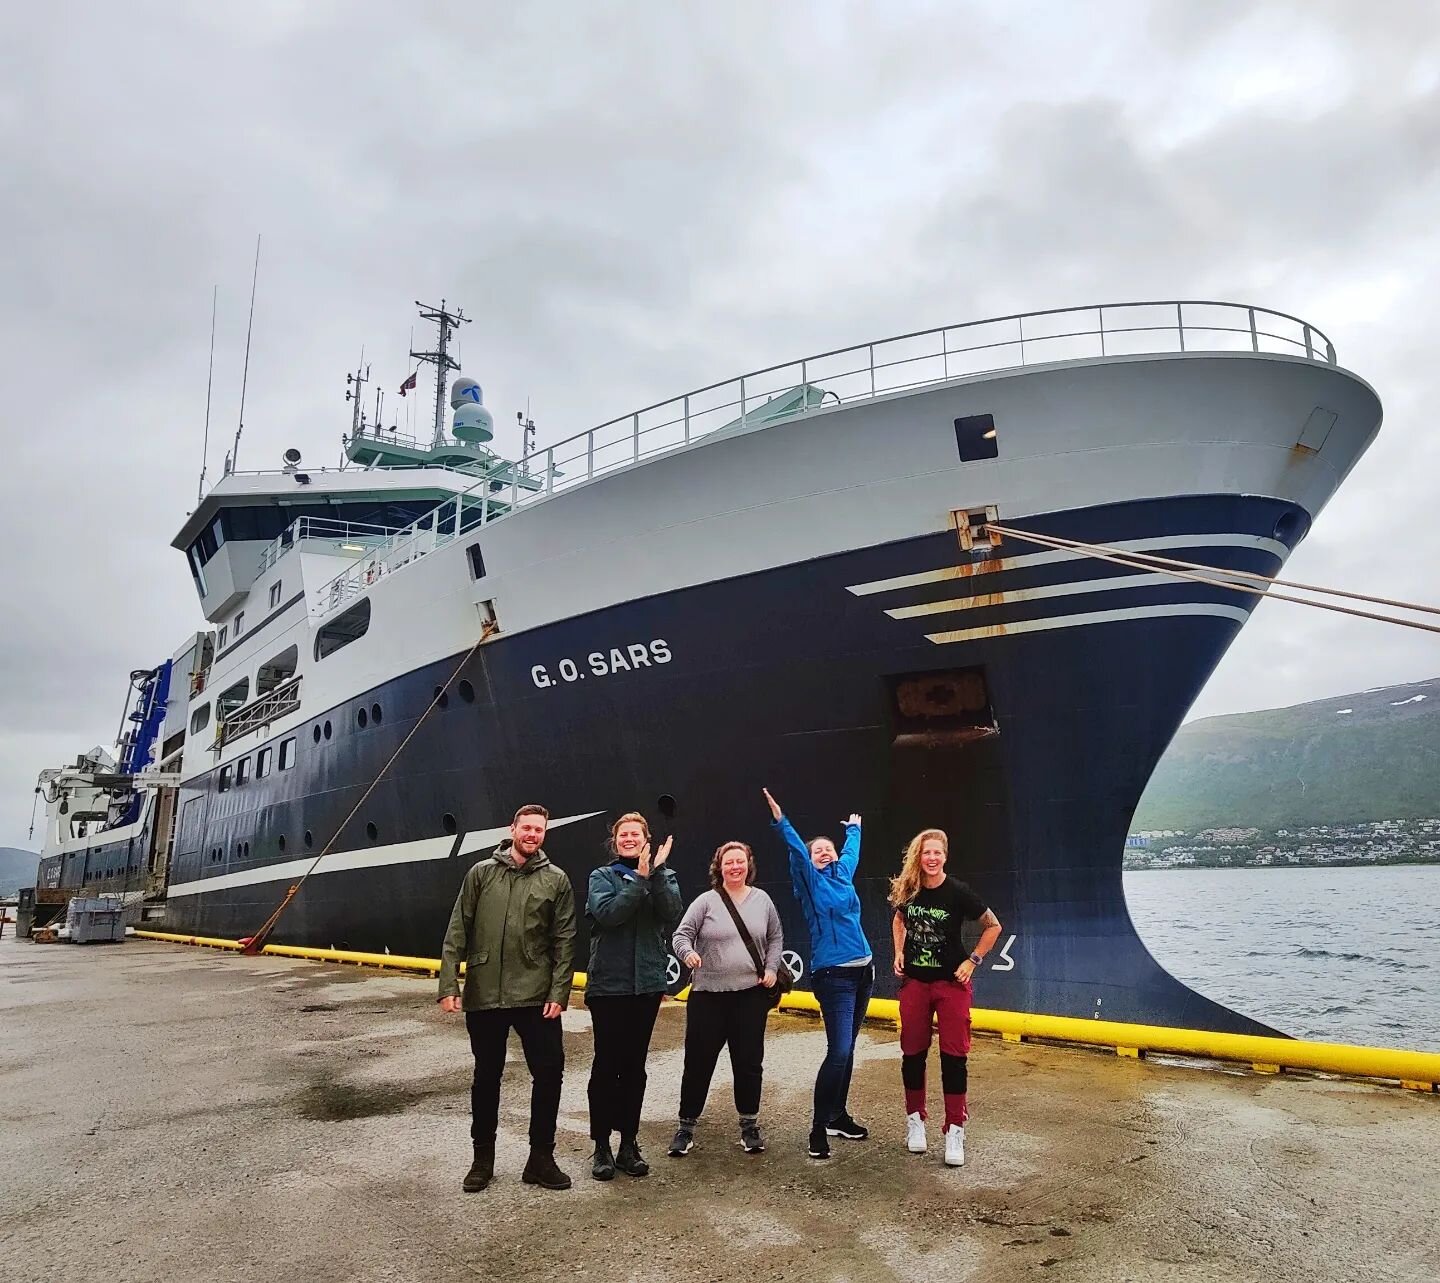 I&rsquo;M SO EXCITED!
So much in fact that this post will be in English, because apparently that is my excited language these days. 

Anyway, I&rsquo;m heading off to sea in this magic boat! We&rsquo;re going to the Greenland sea / Mid Atlantic Ridge